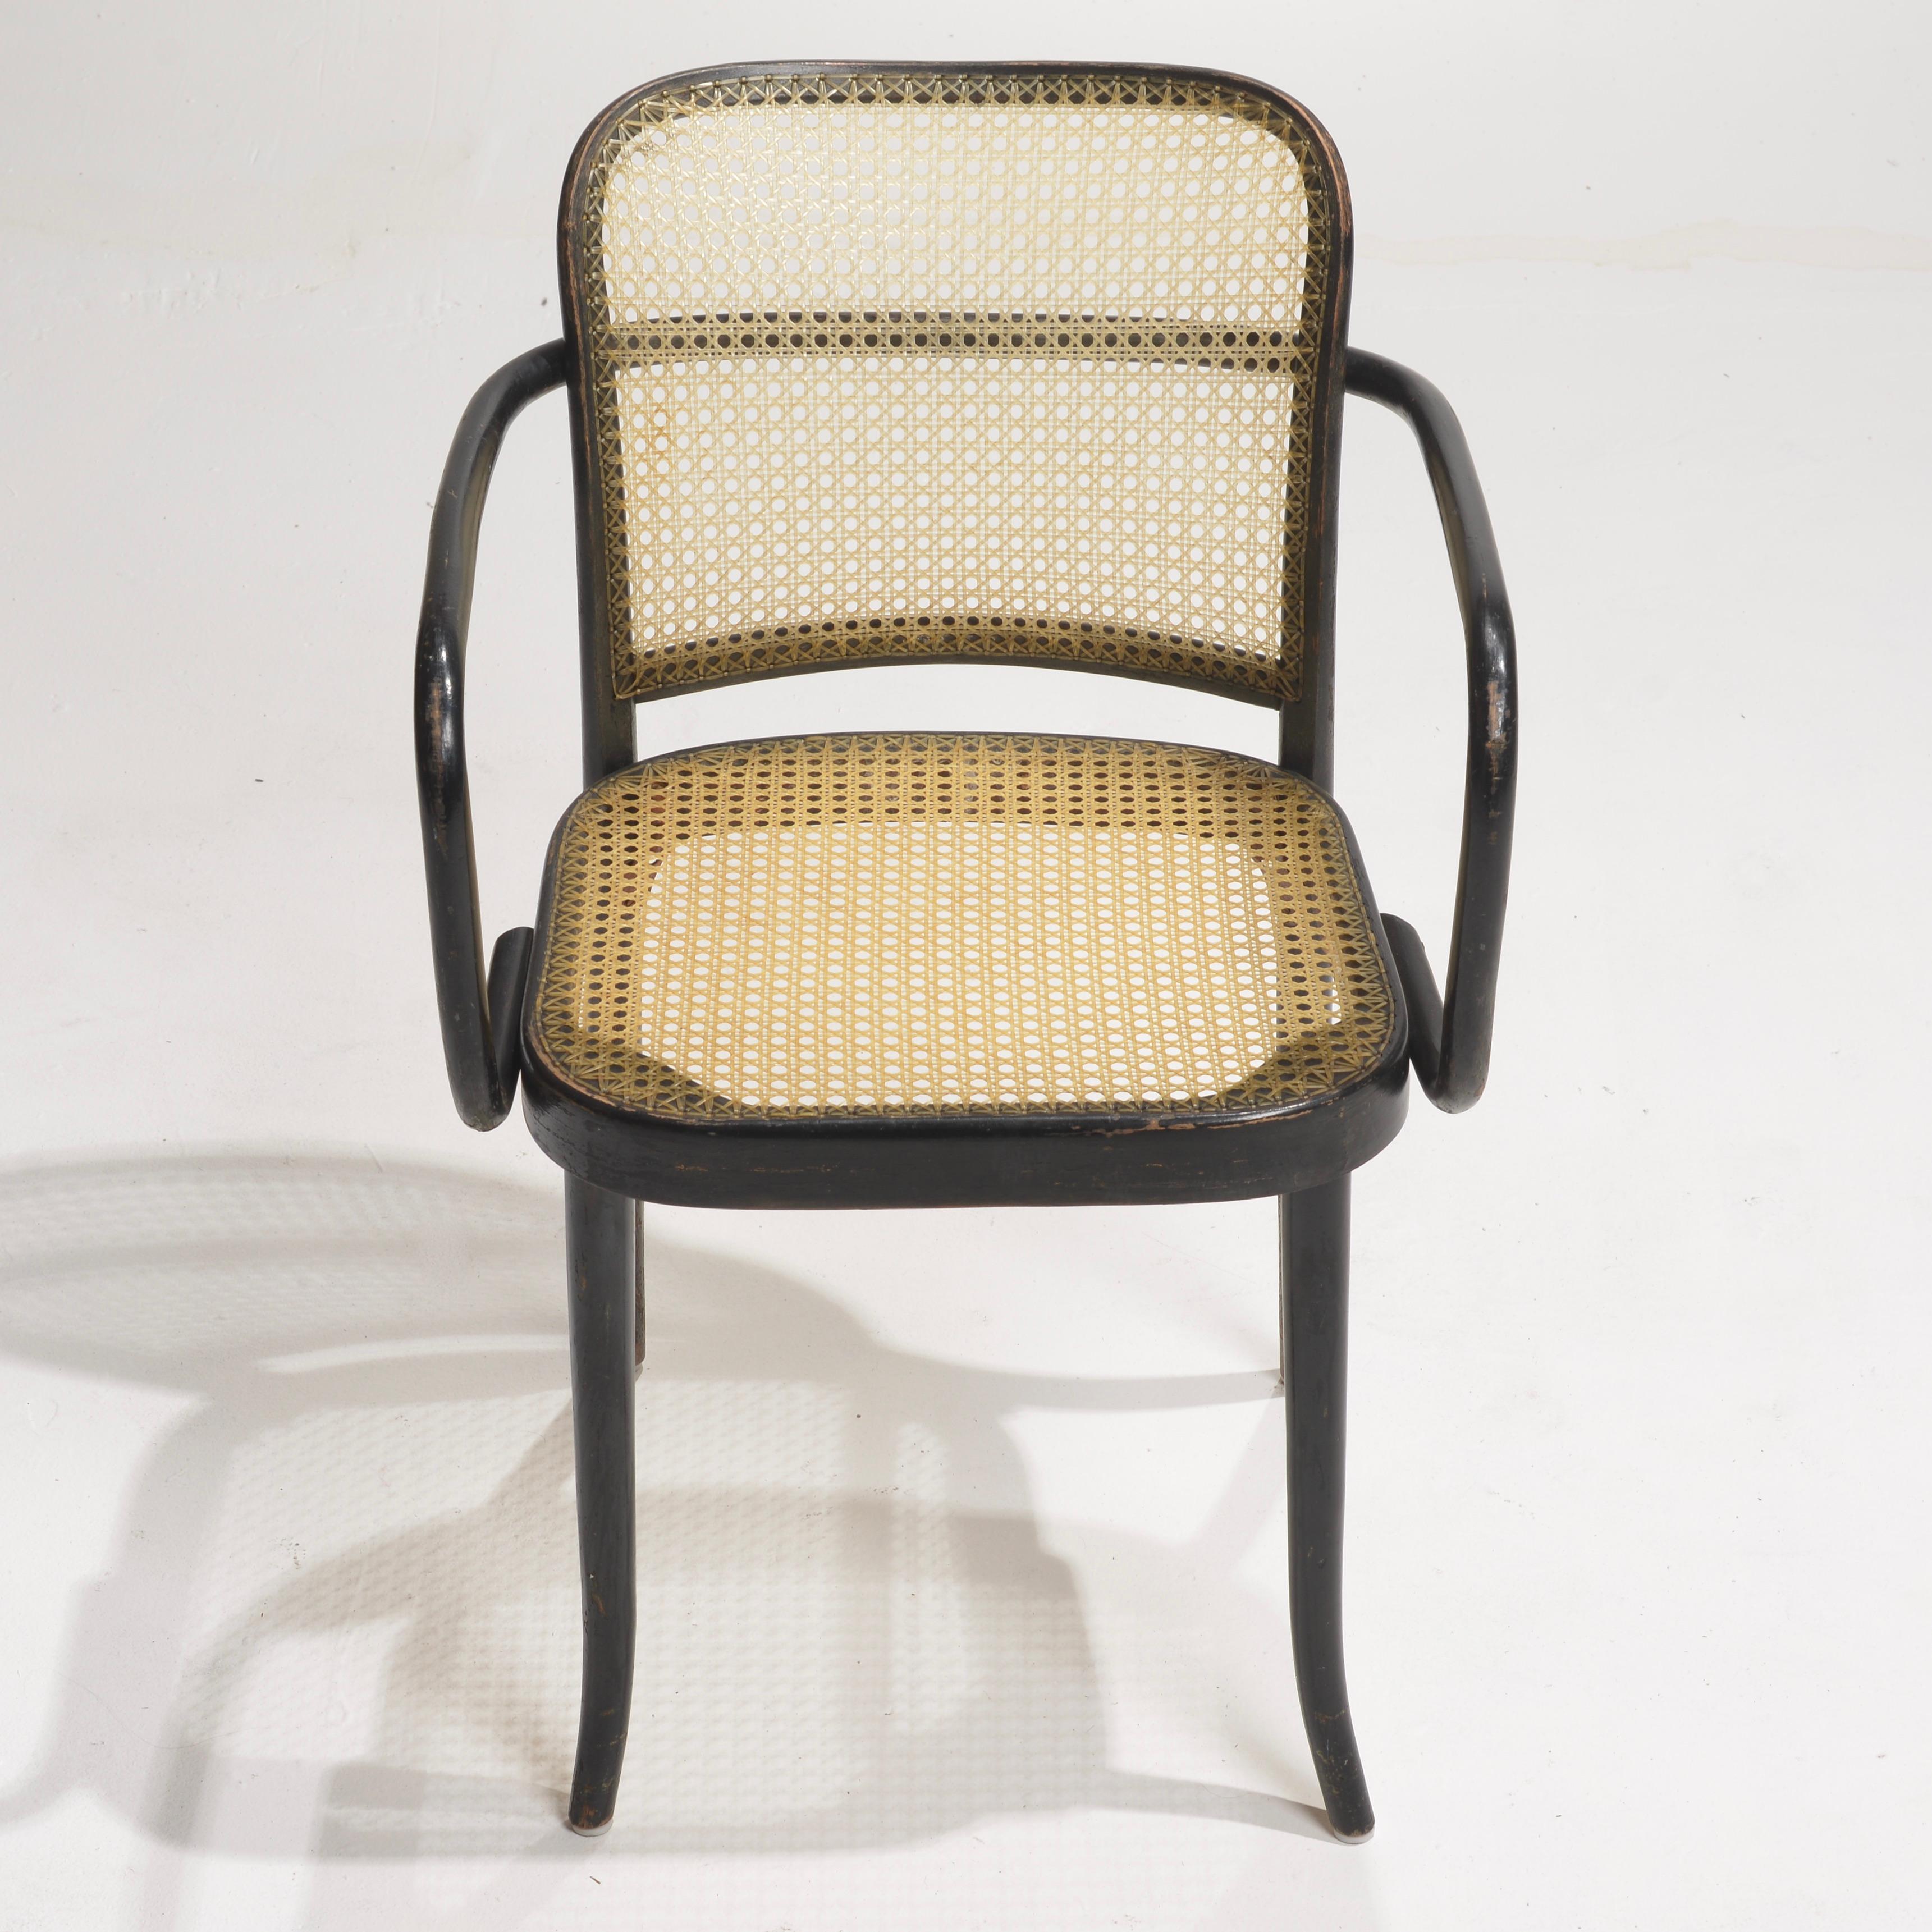 Josef Hoffmann Bentwood Beech Prague Model 811 Chairs in Black and Leather Weave For Sale 2